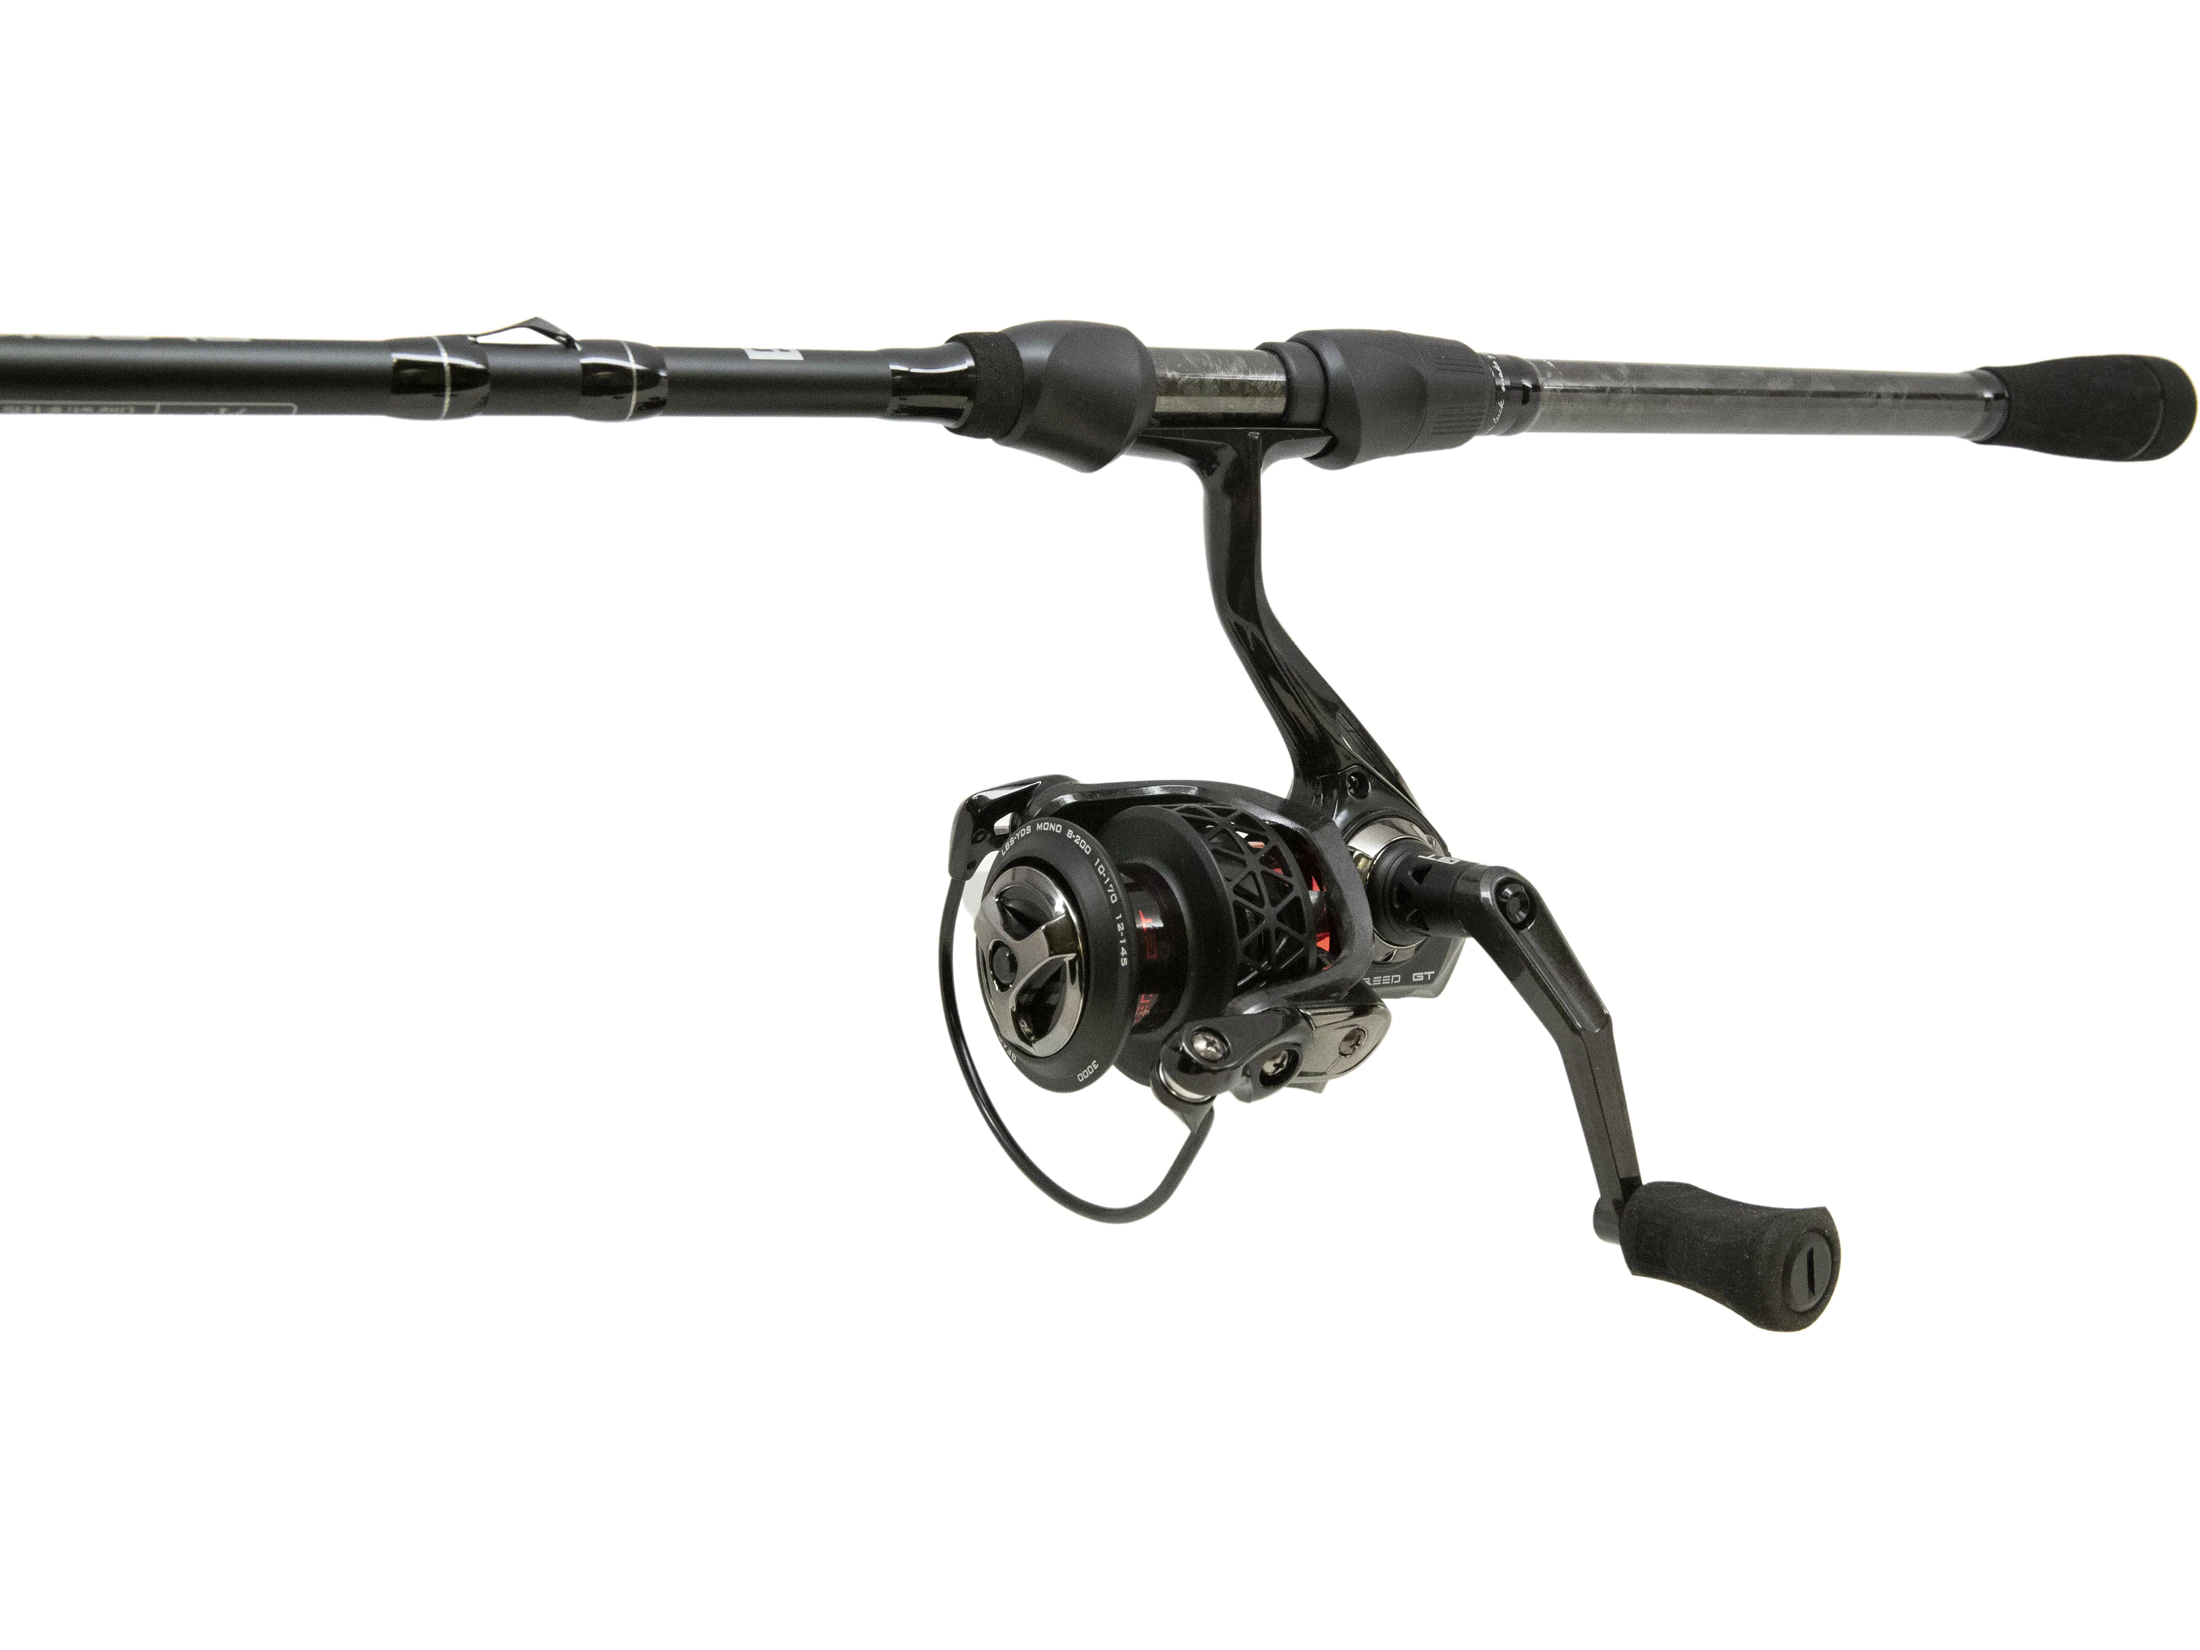 13 Fishing Fate V3 Spin Rod - Mel's Outdoors